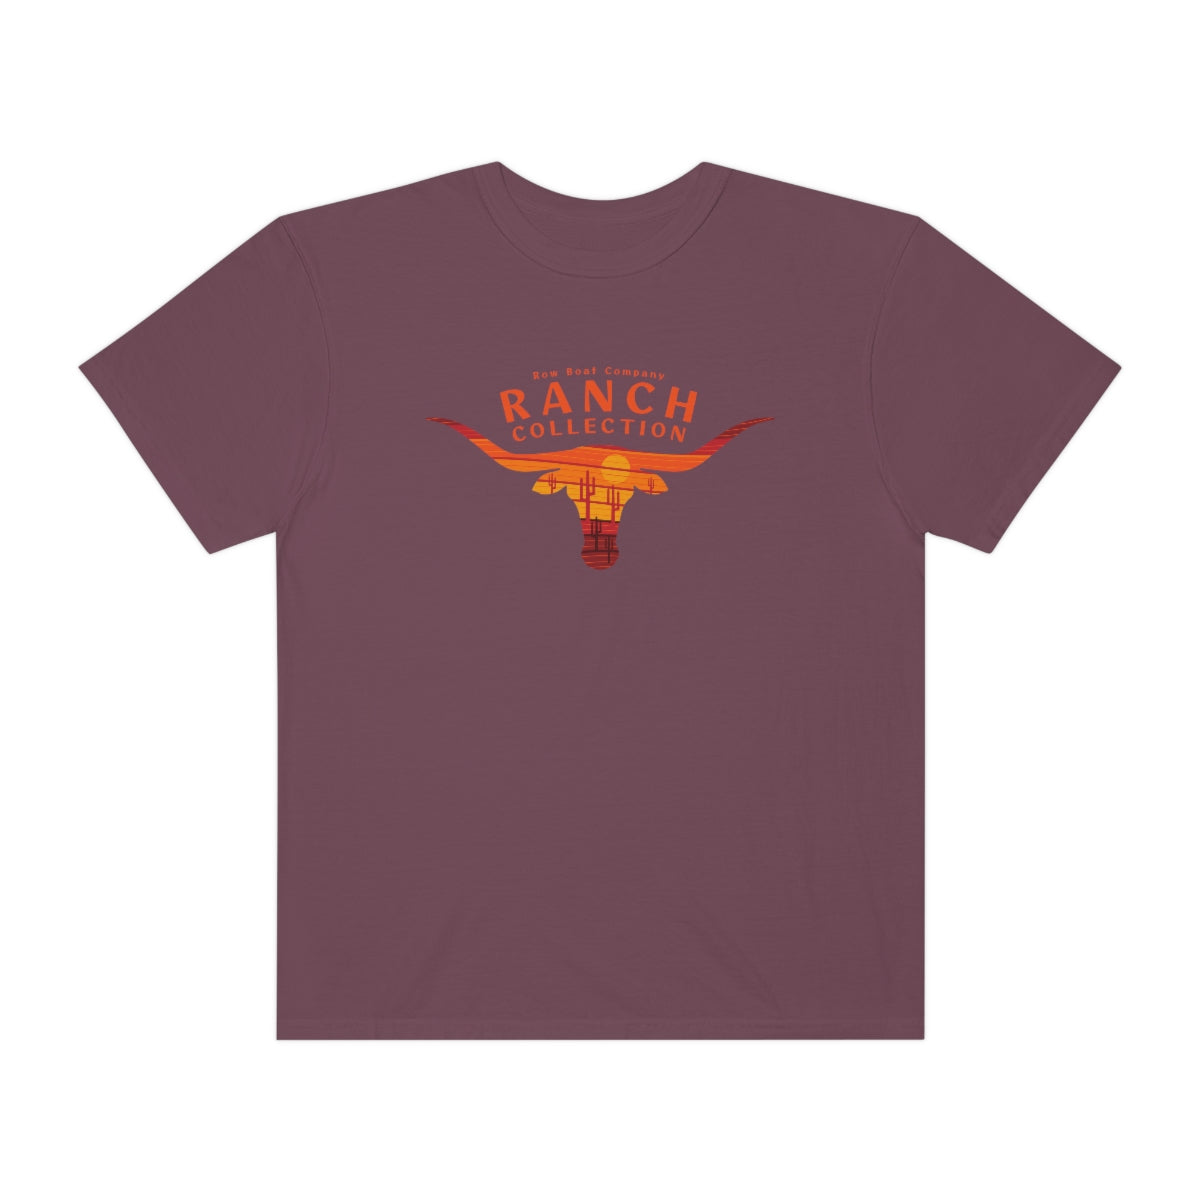 Ranch Collection Bull T Shirt